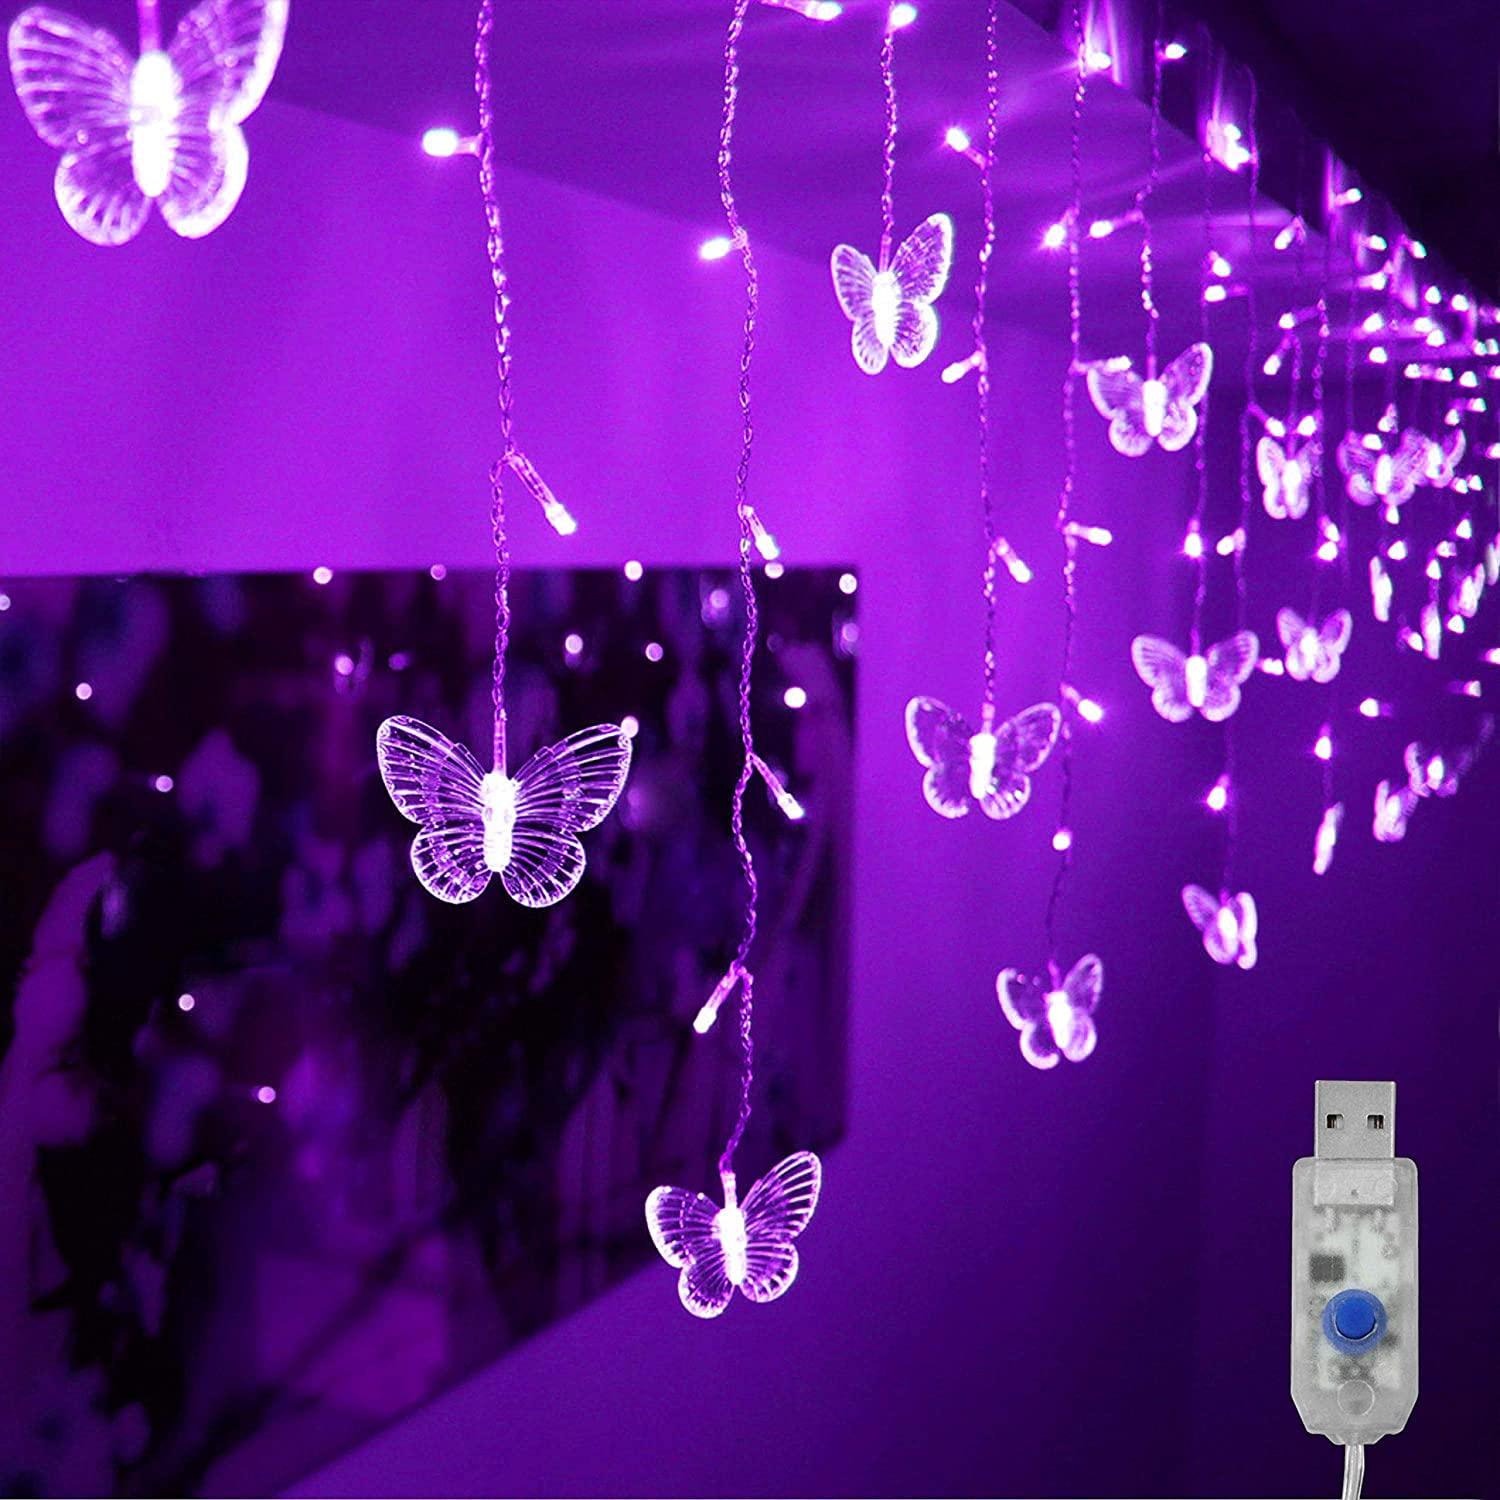 Curtain Lights 48 LED USB Powered 8 Modes Waterproof Window Curtain String Lights with 10 Butterflies Lights for Christmas Holiday Party Decoration - Lasercutwraps Shop